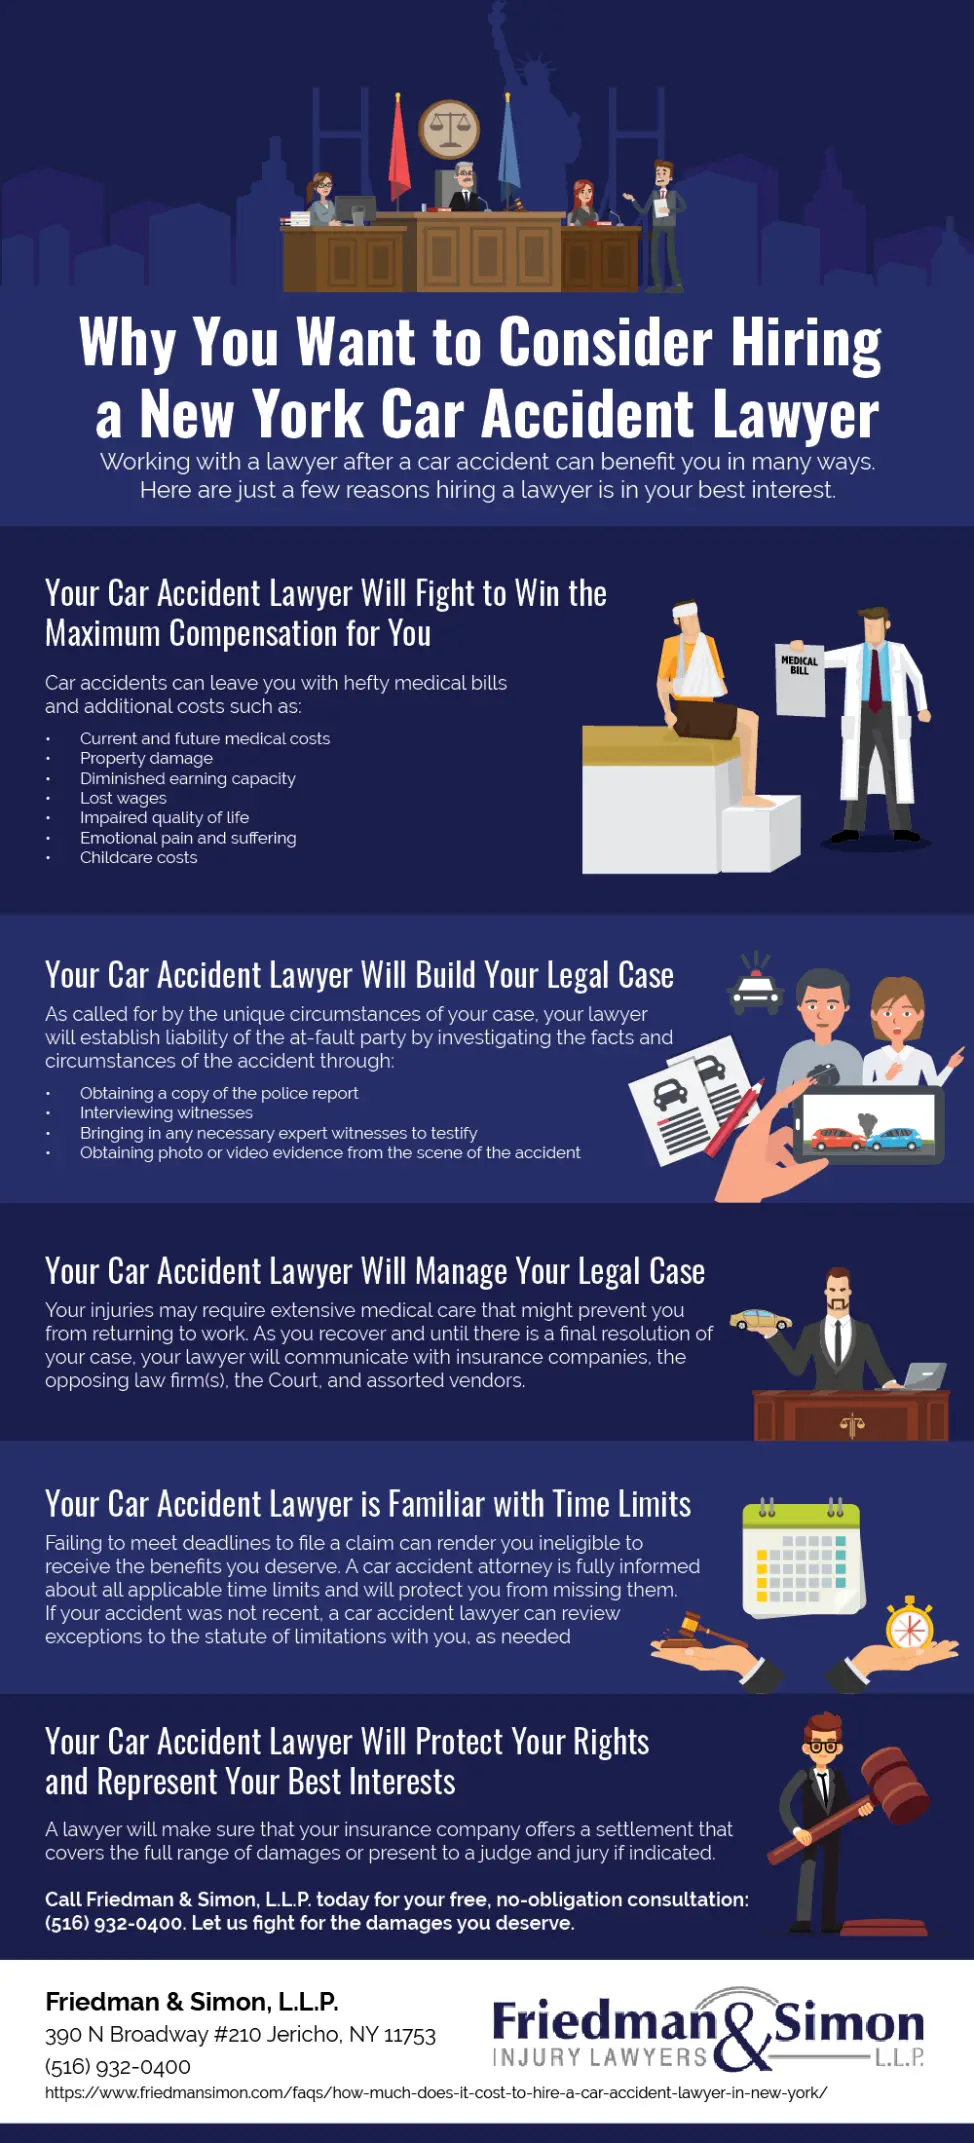 How Much Does It Cost To Hire A Car Accident Lawyer In New York?